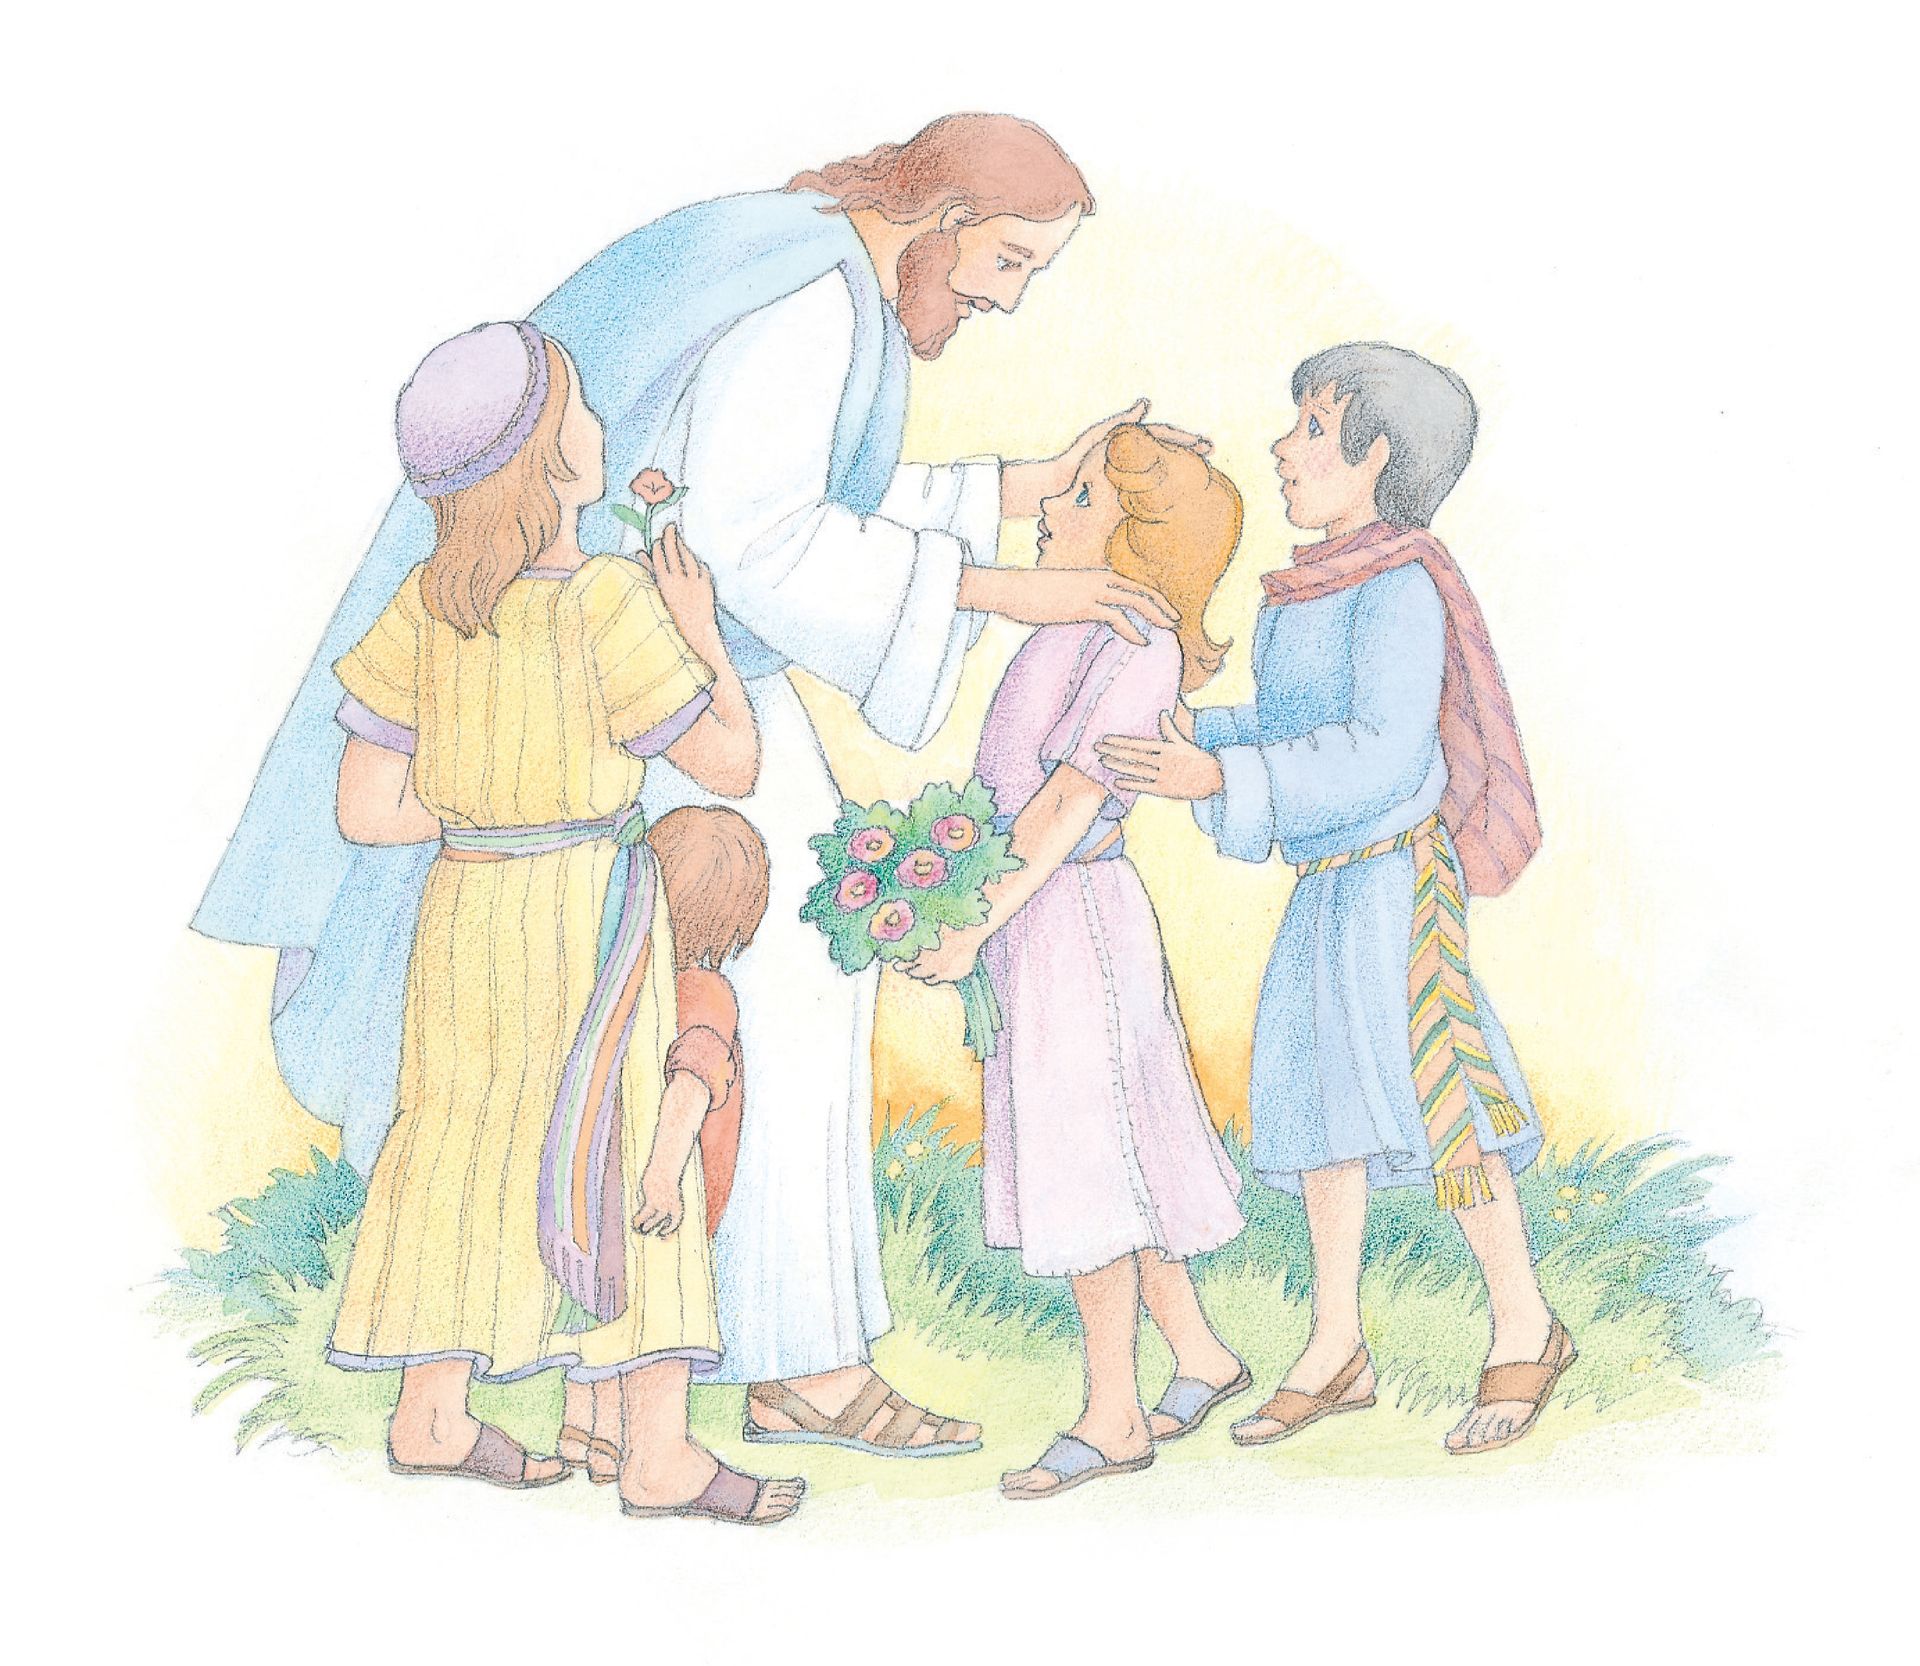 Christ standing and interacting with four young children. From the Children’s Songbook, page 80, “Had I Been a Child”; watercolor illustration by Phyllis Luch.